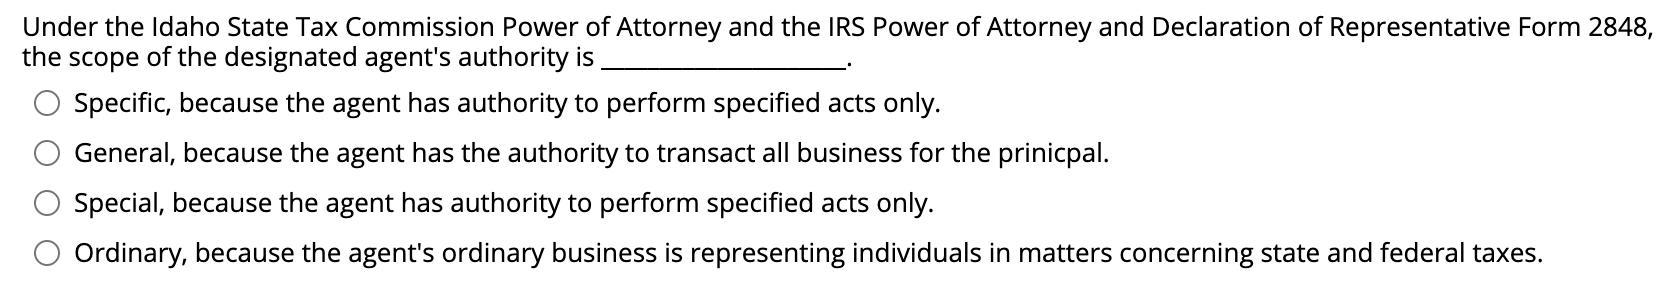 Under the Idaho State Tax Commission Power of Attorney and the IRS Power of Attorney and Declaration of Representative Form 2